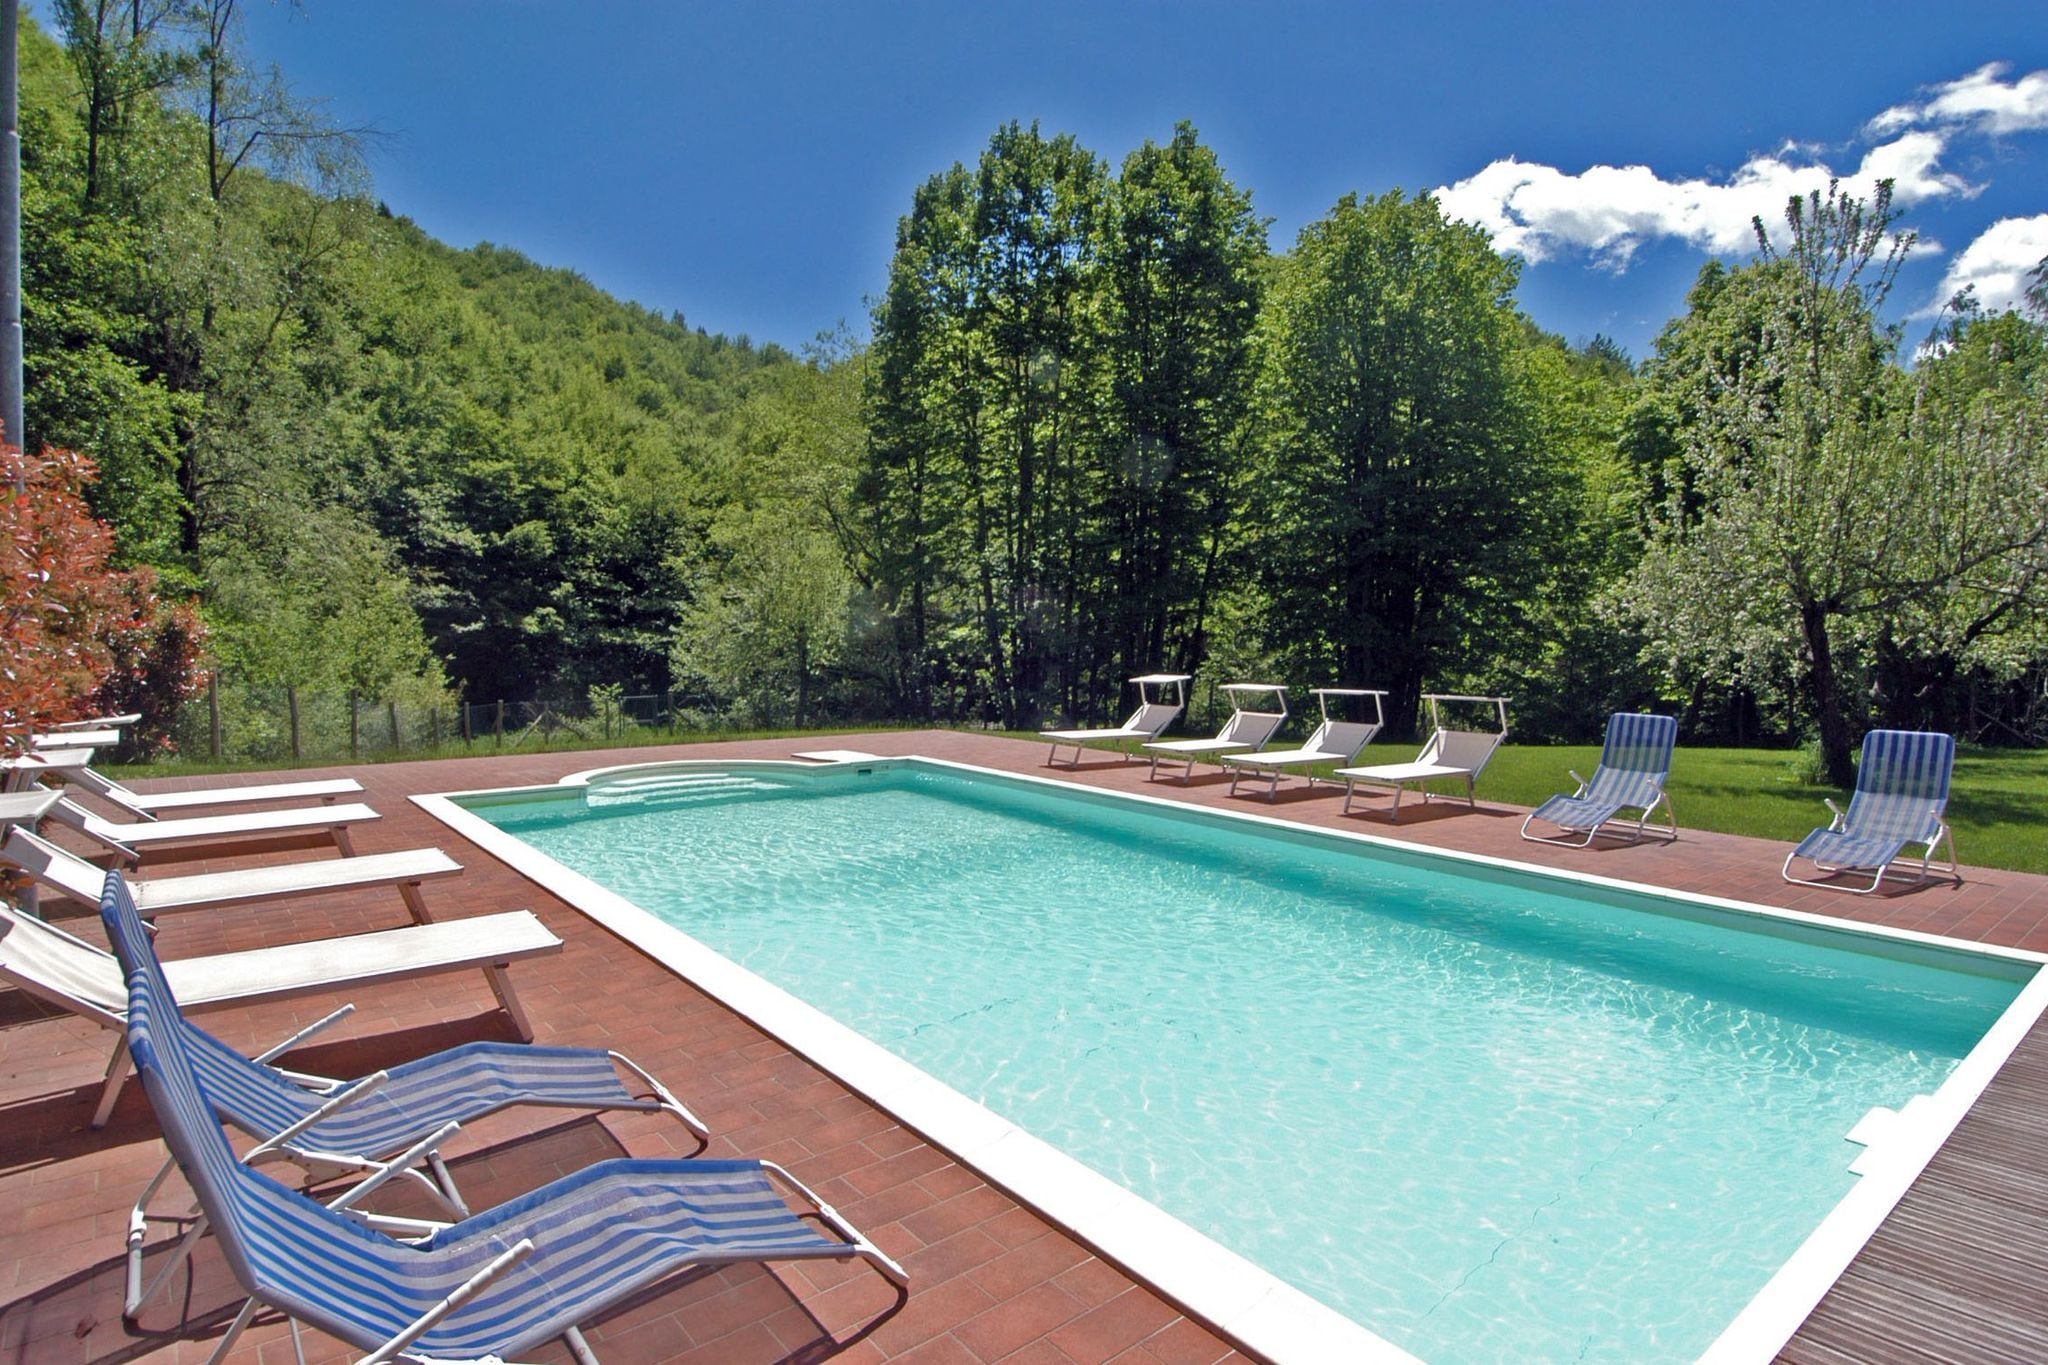 Exclusive Villa in Pistoia with Swimming Pool